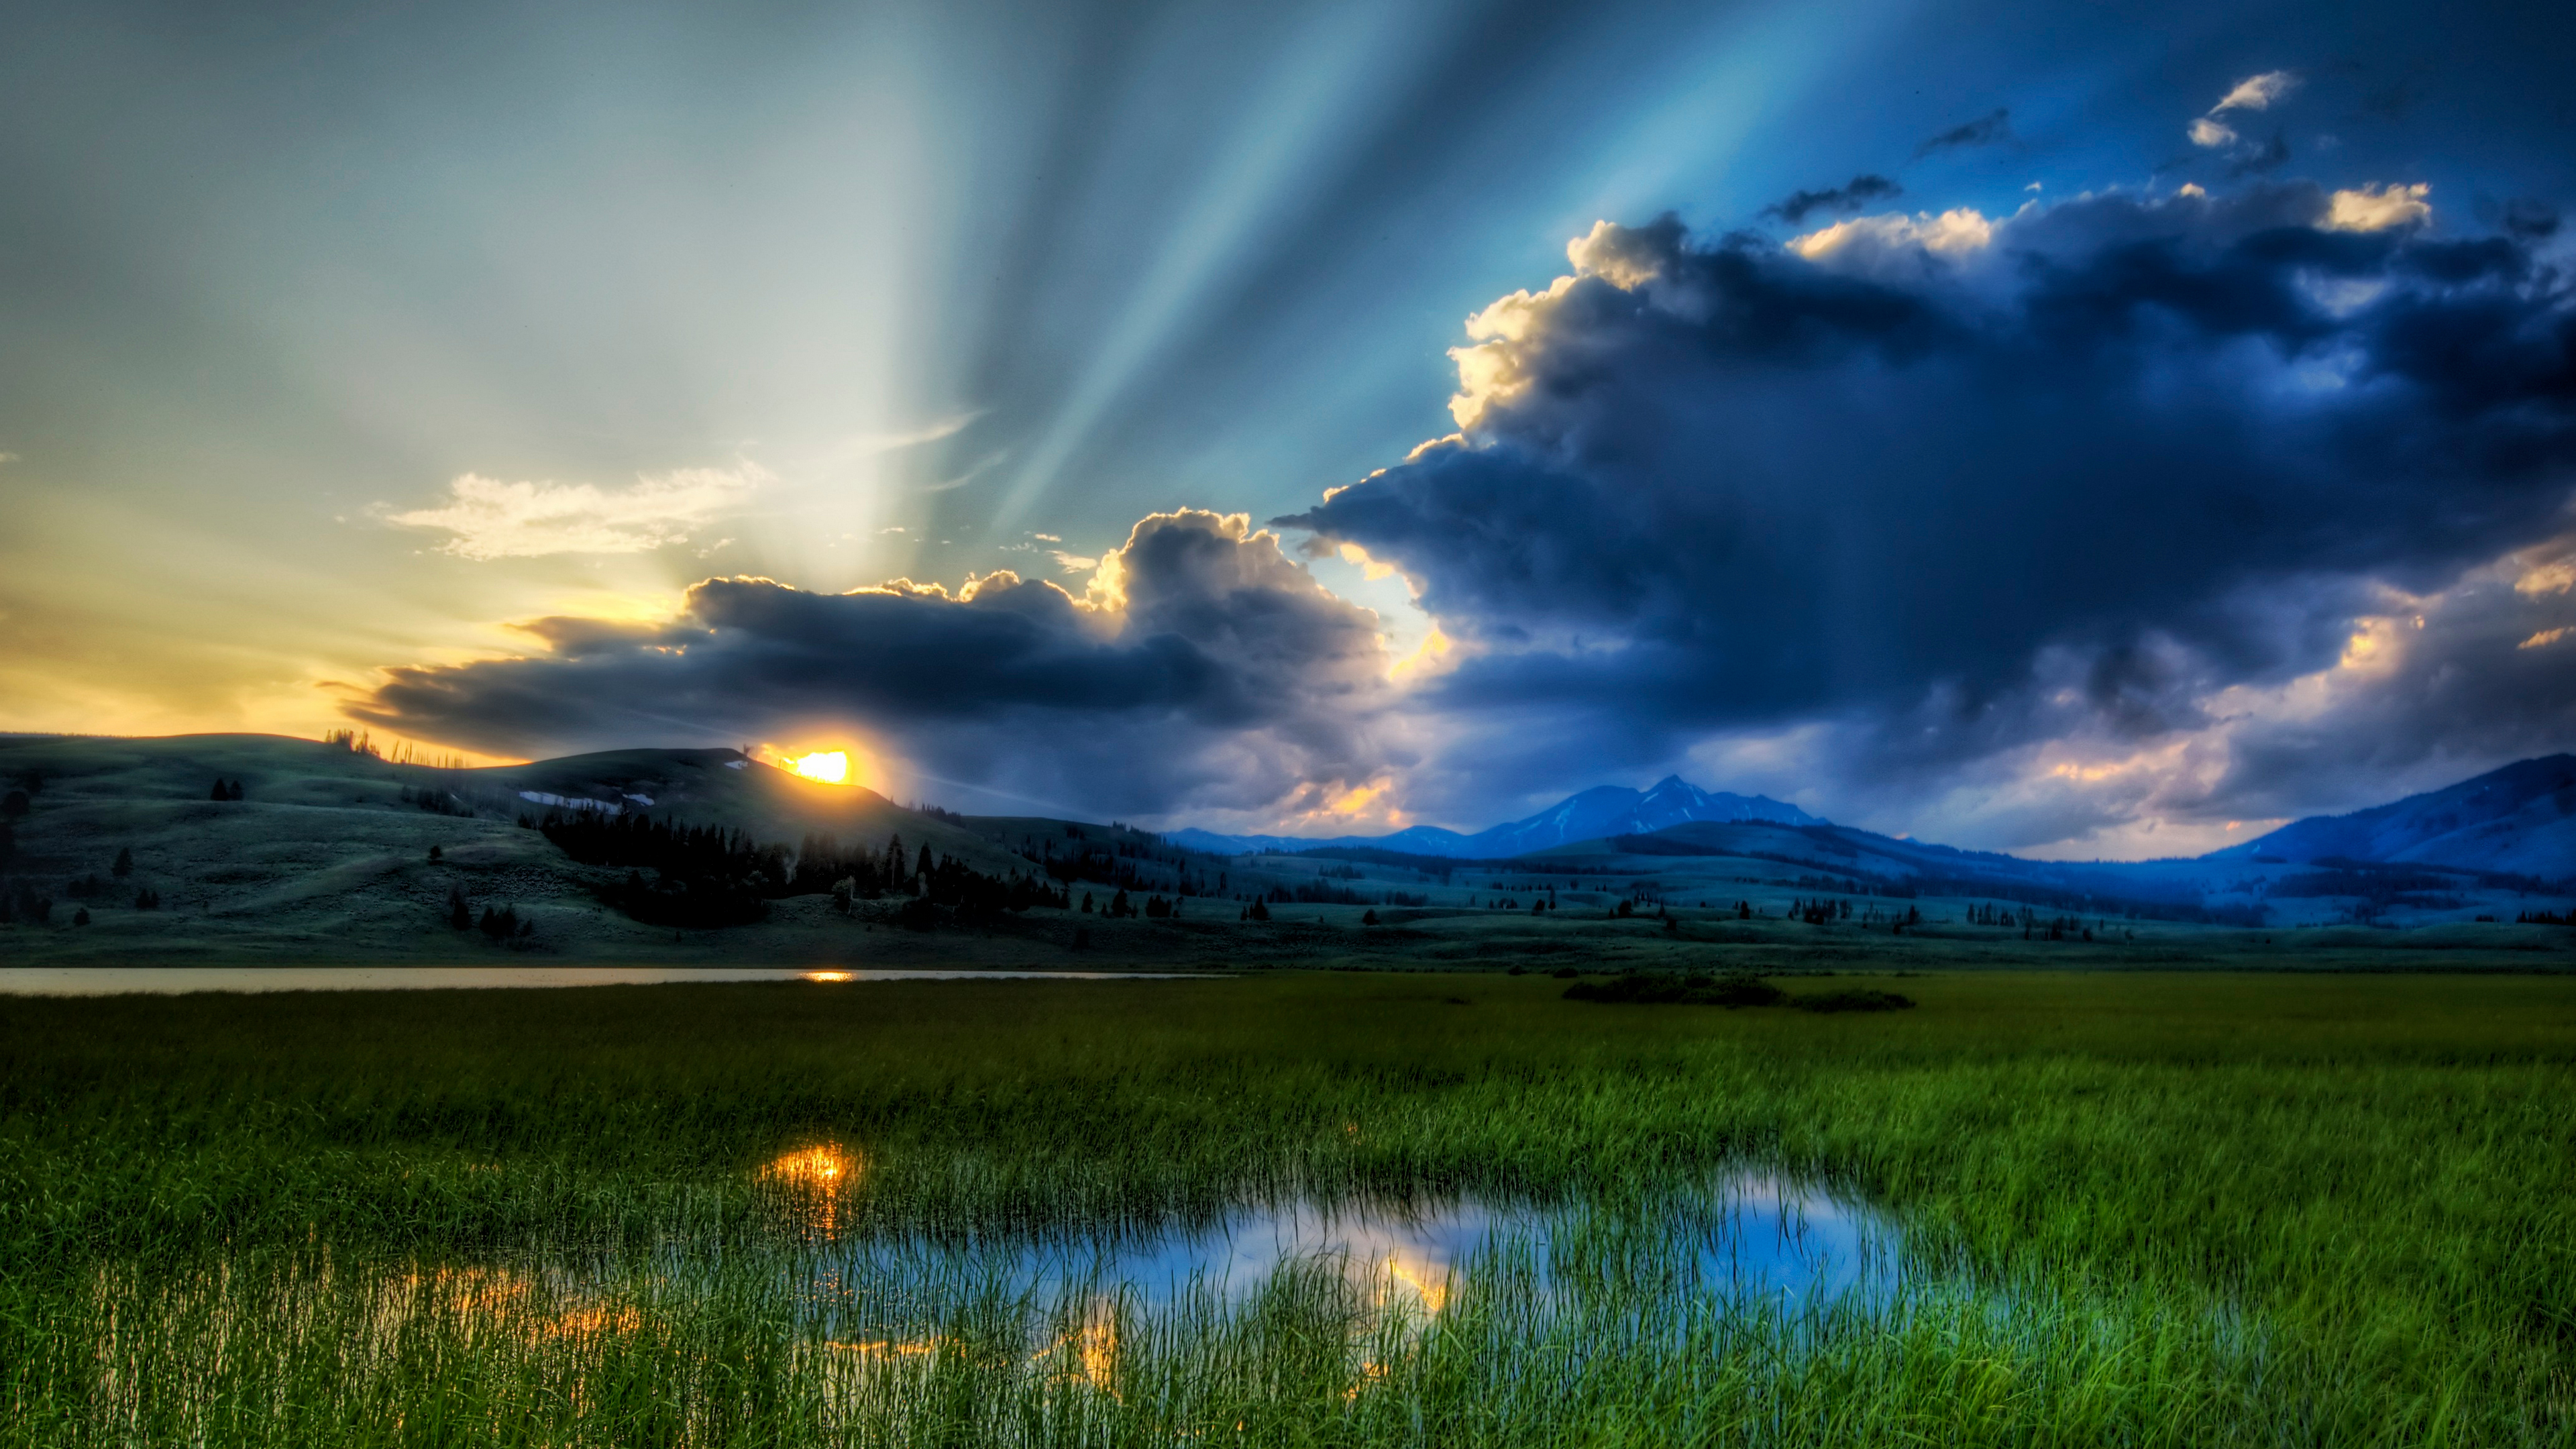 Trey Ratcliff Photography Landscape Nature Summer Sunset Water Mountains Hills Sky Clouds Sunset Glo 3840x2160